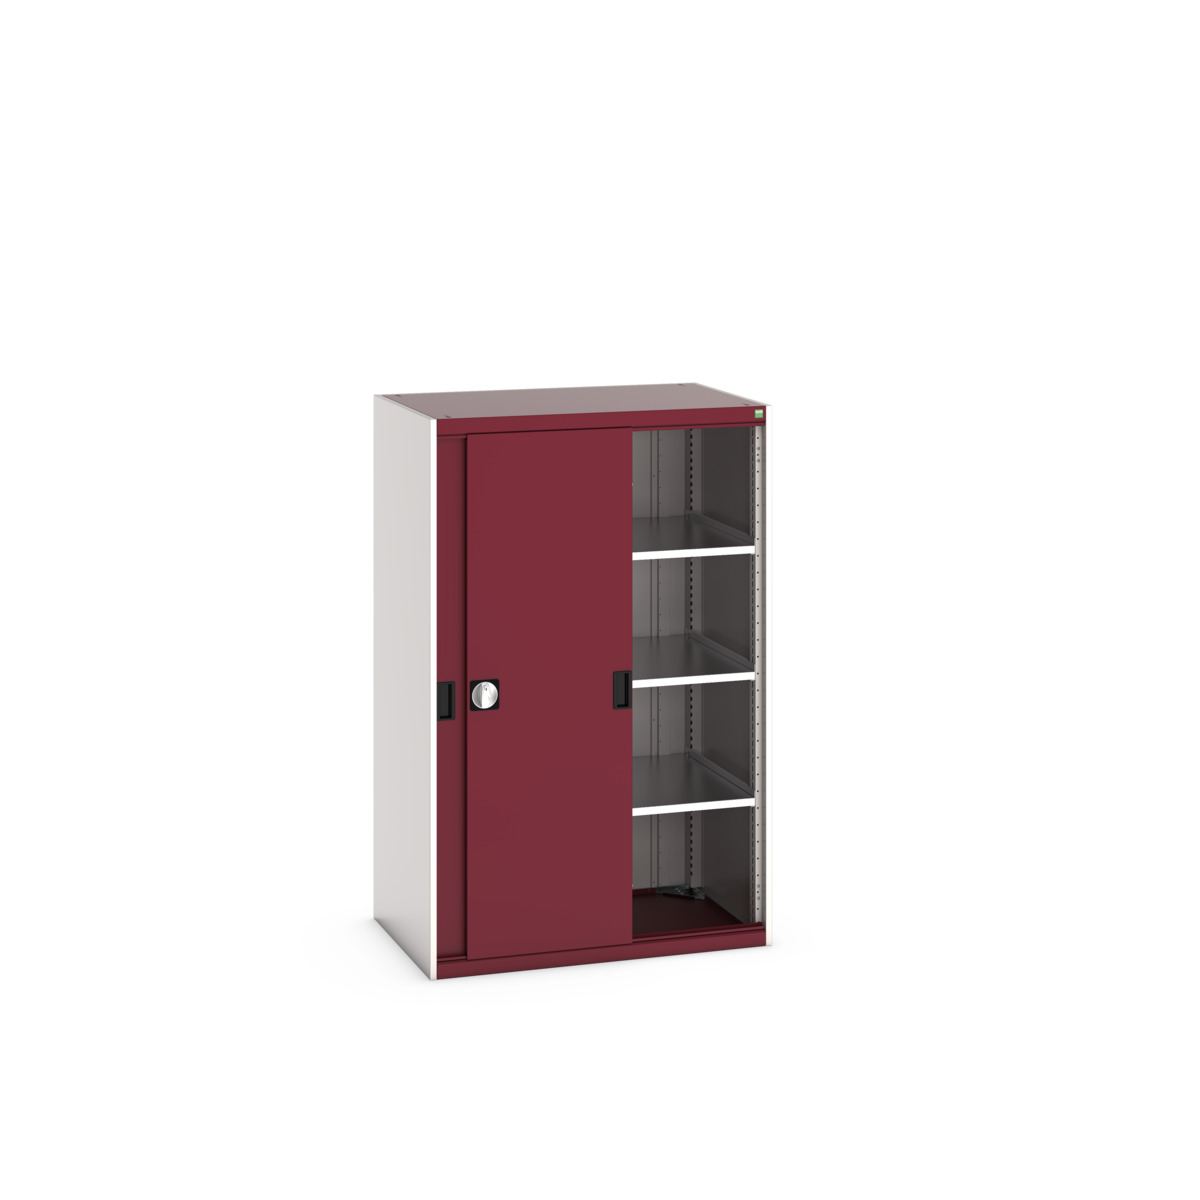 40021214.24V - Armoire Cubio SMS-10616-1